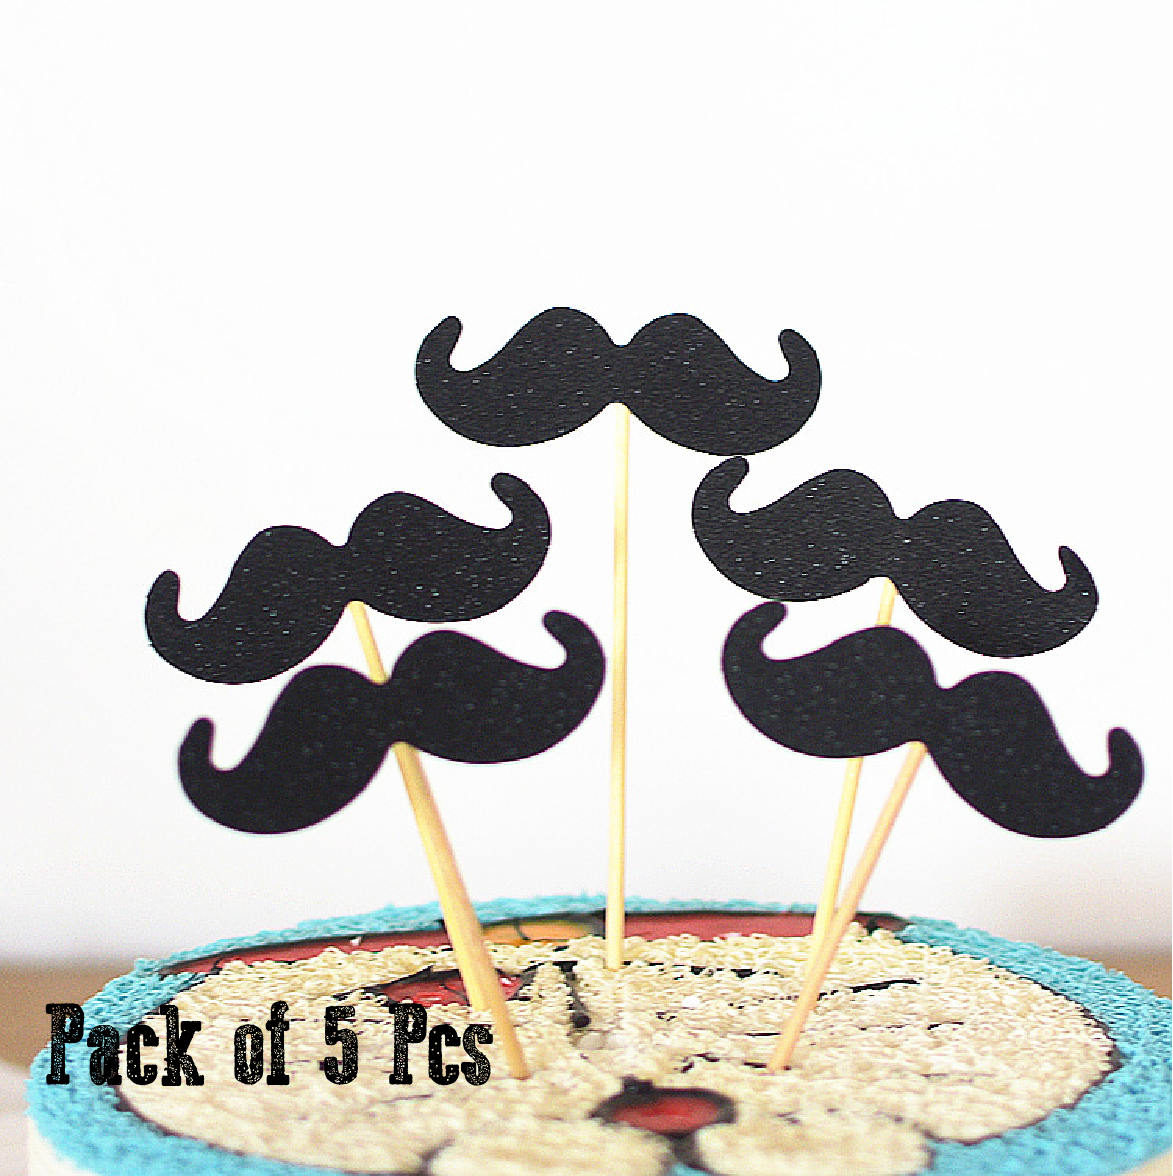 Cake Cup Cake Topper Decorations- moustache For Ded Men Boy - Rampant Coffee Company